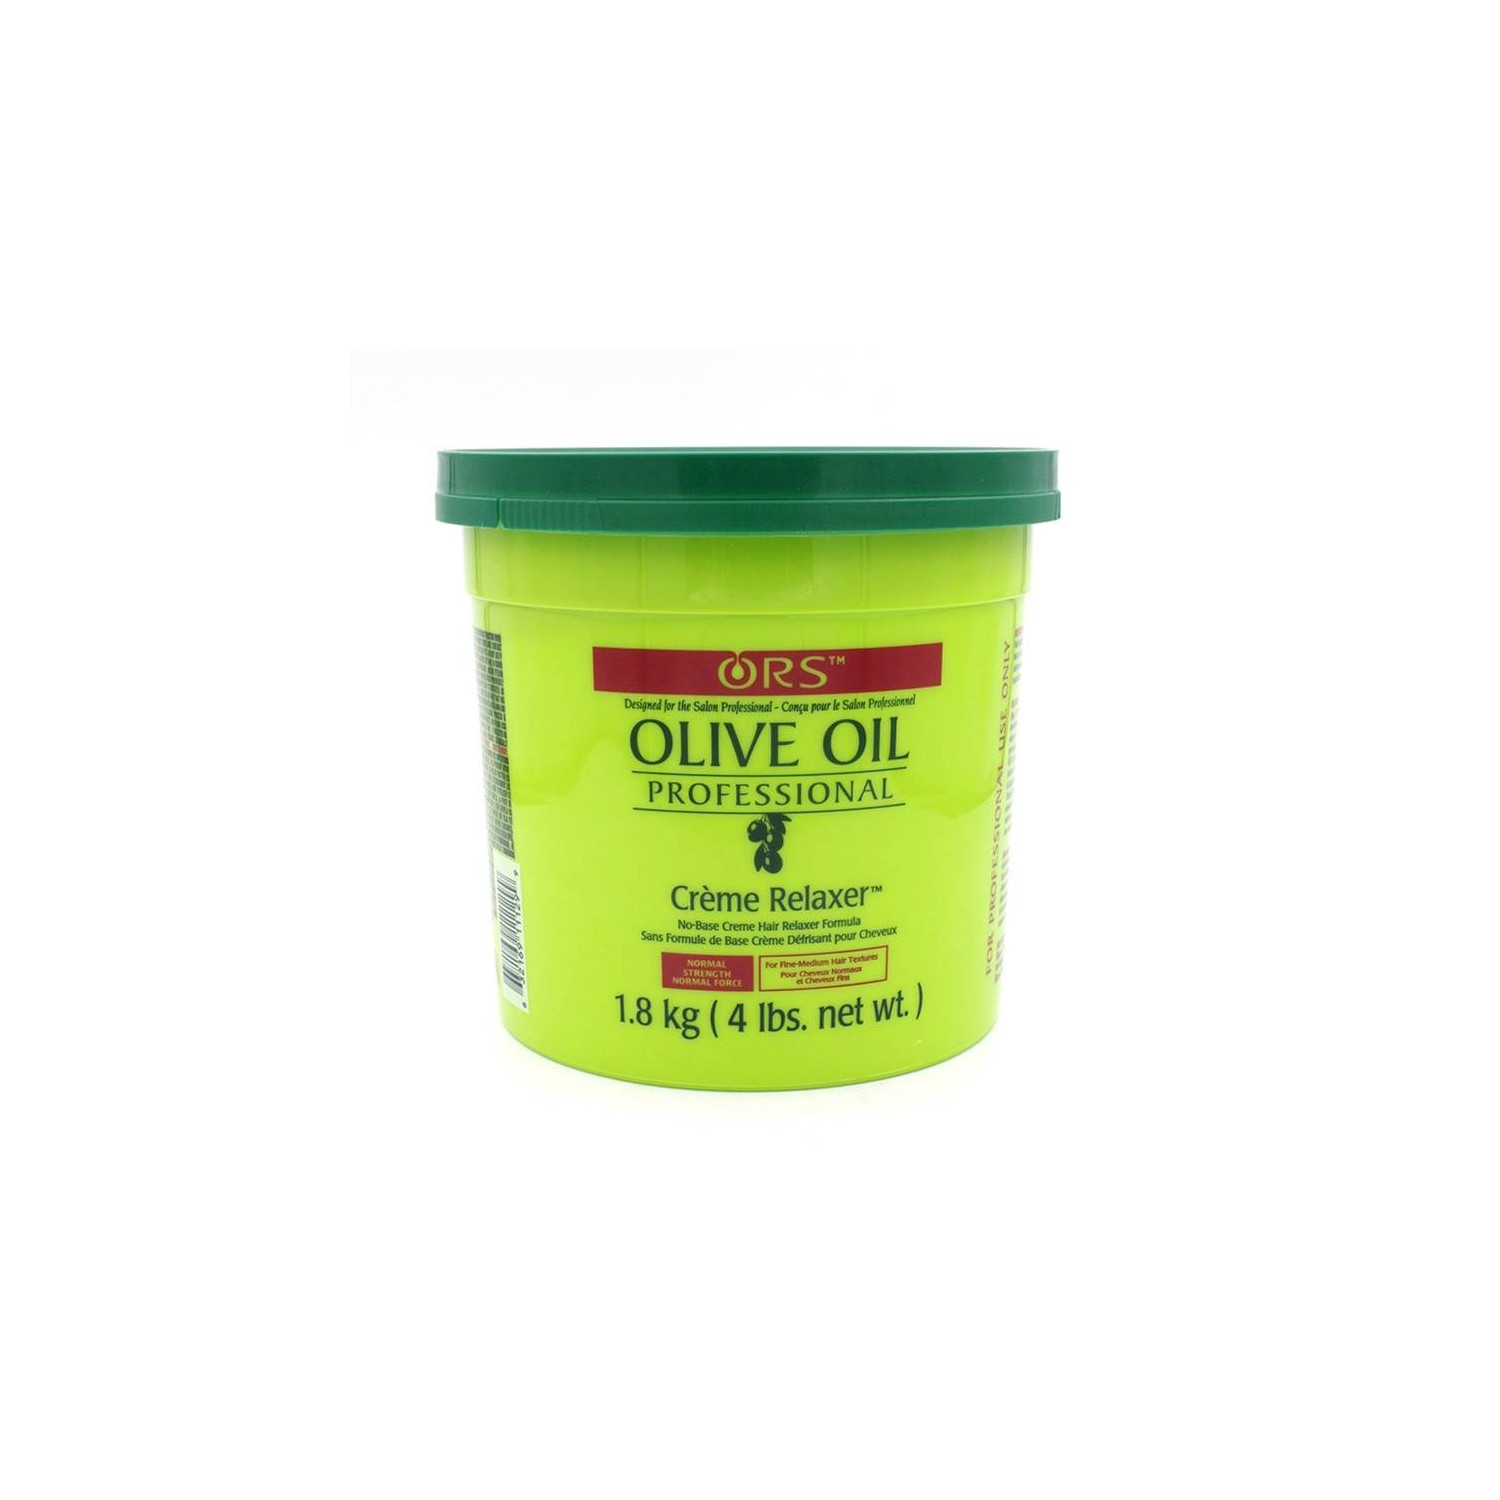 Ors Olive Oil Crème Relaxer Normal1,8 Kg